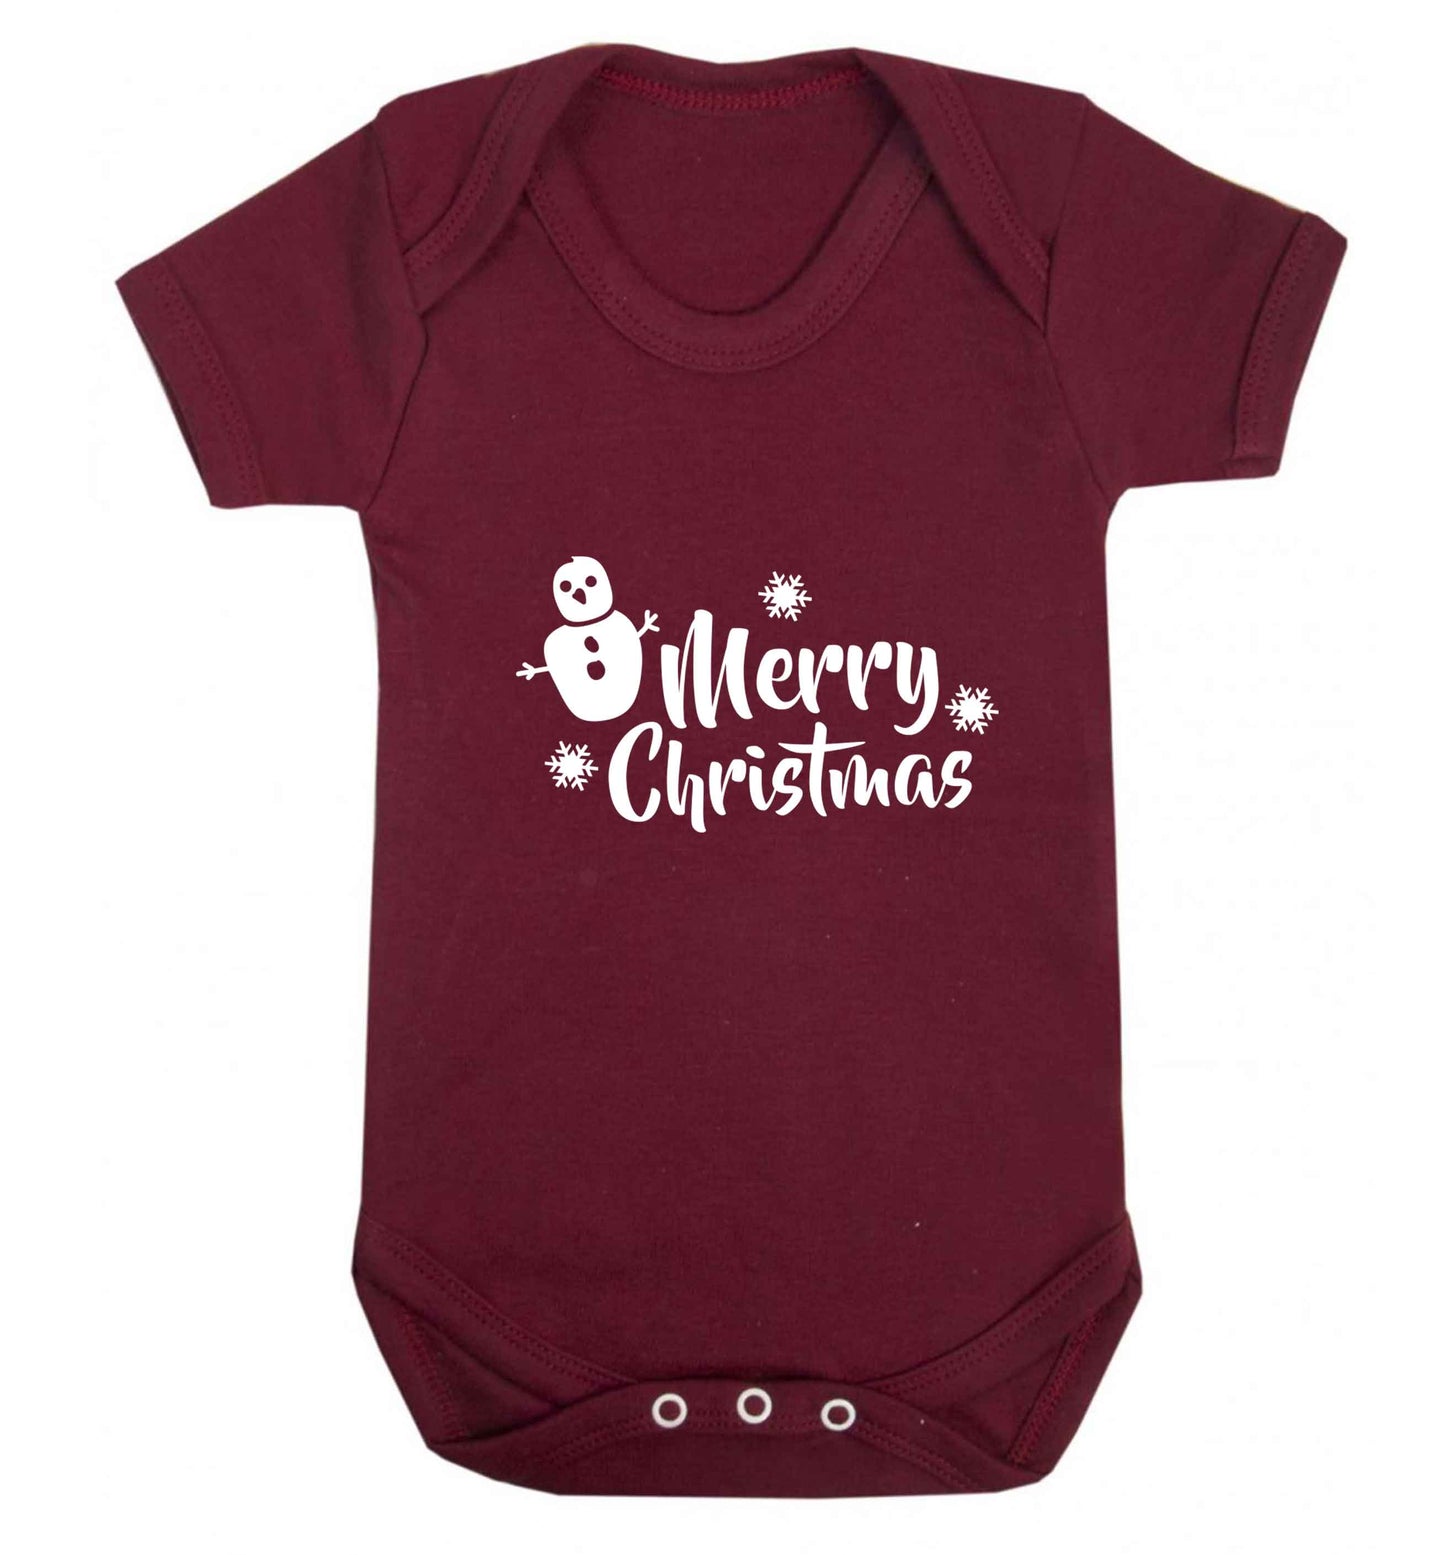 Merry Christmas - snowman baby vest maroon 18-24 months